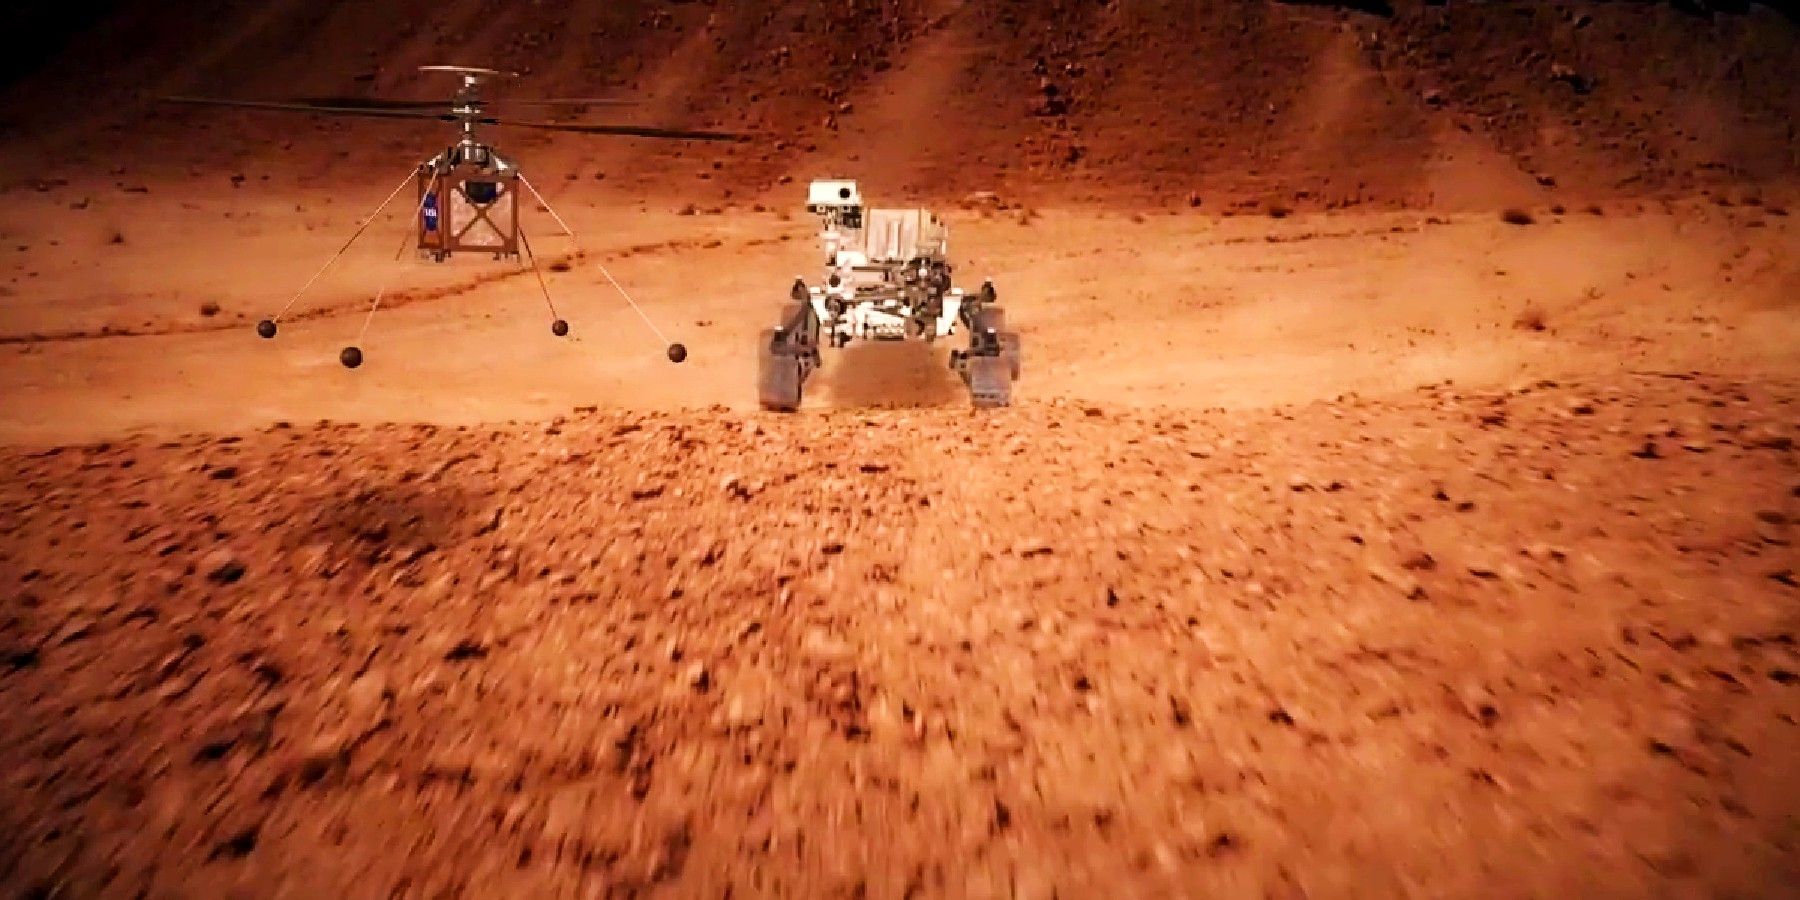 NASAs Mars Helicopter Lost Contact With Rover Could Be In Trouble